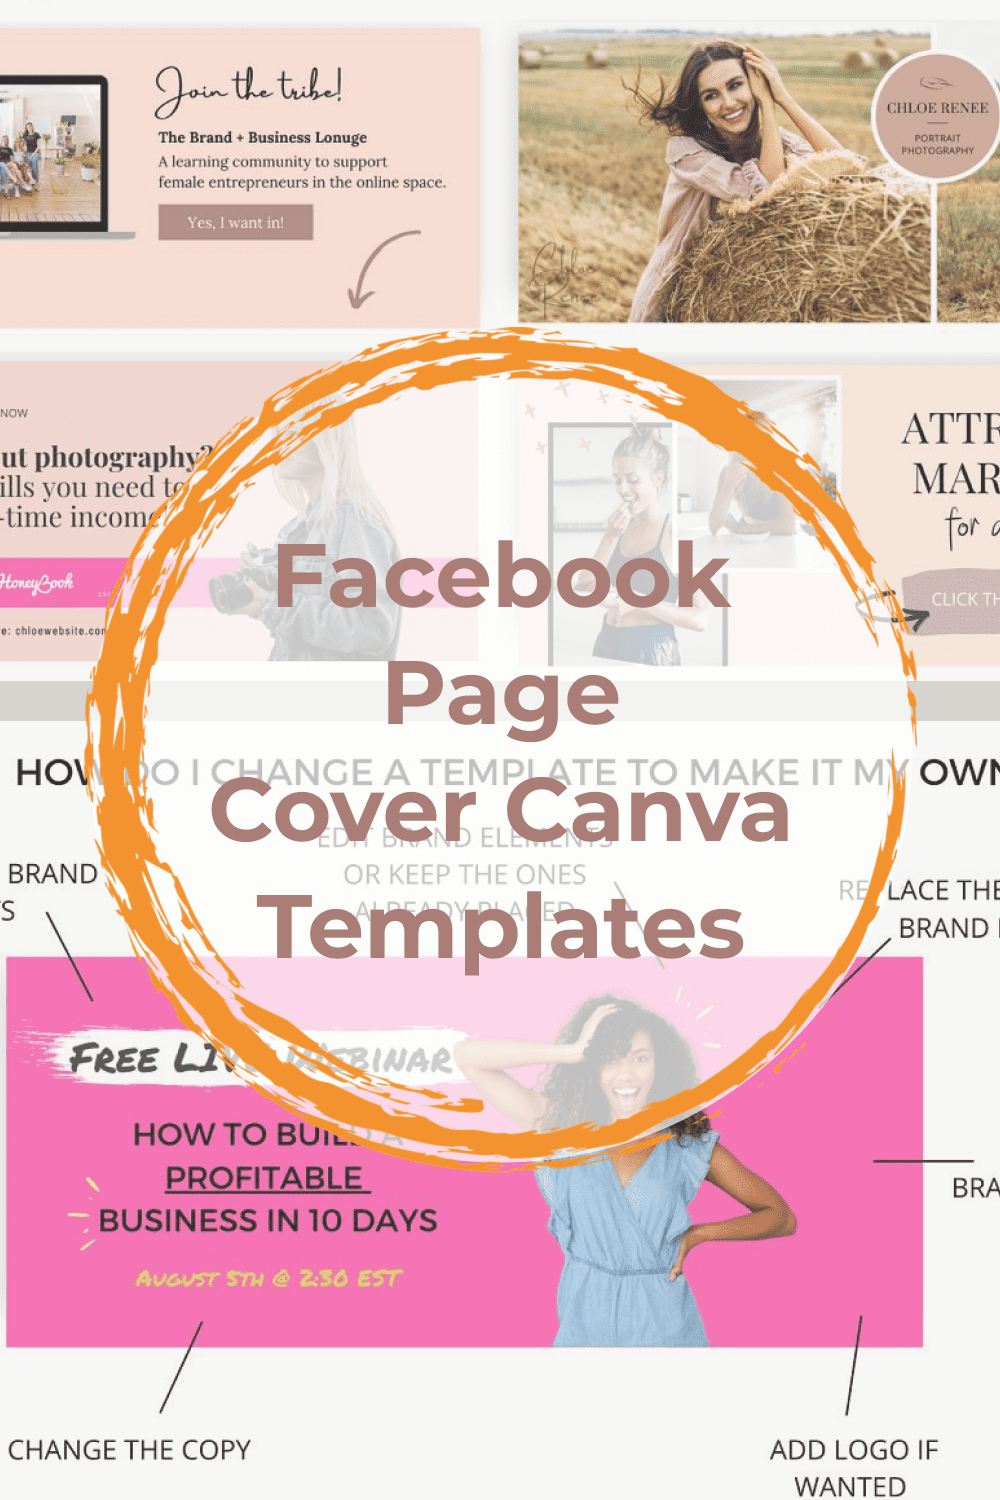 Facebook Page Cover Canva Templates - Pinterest.